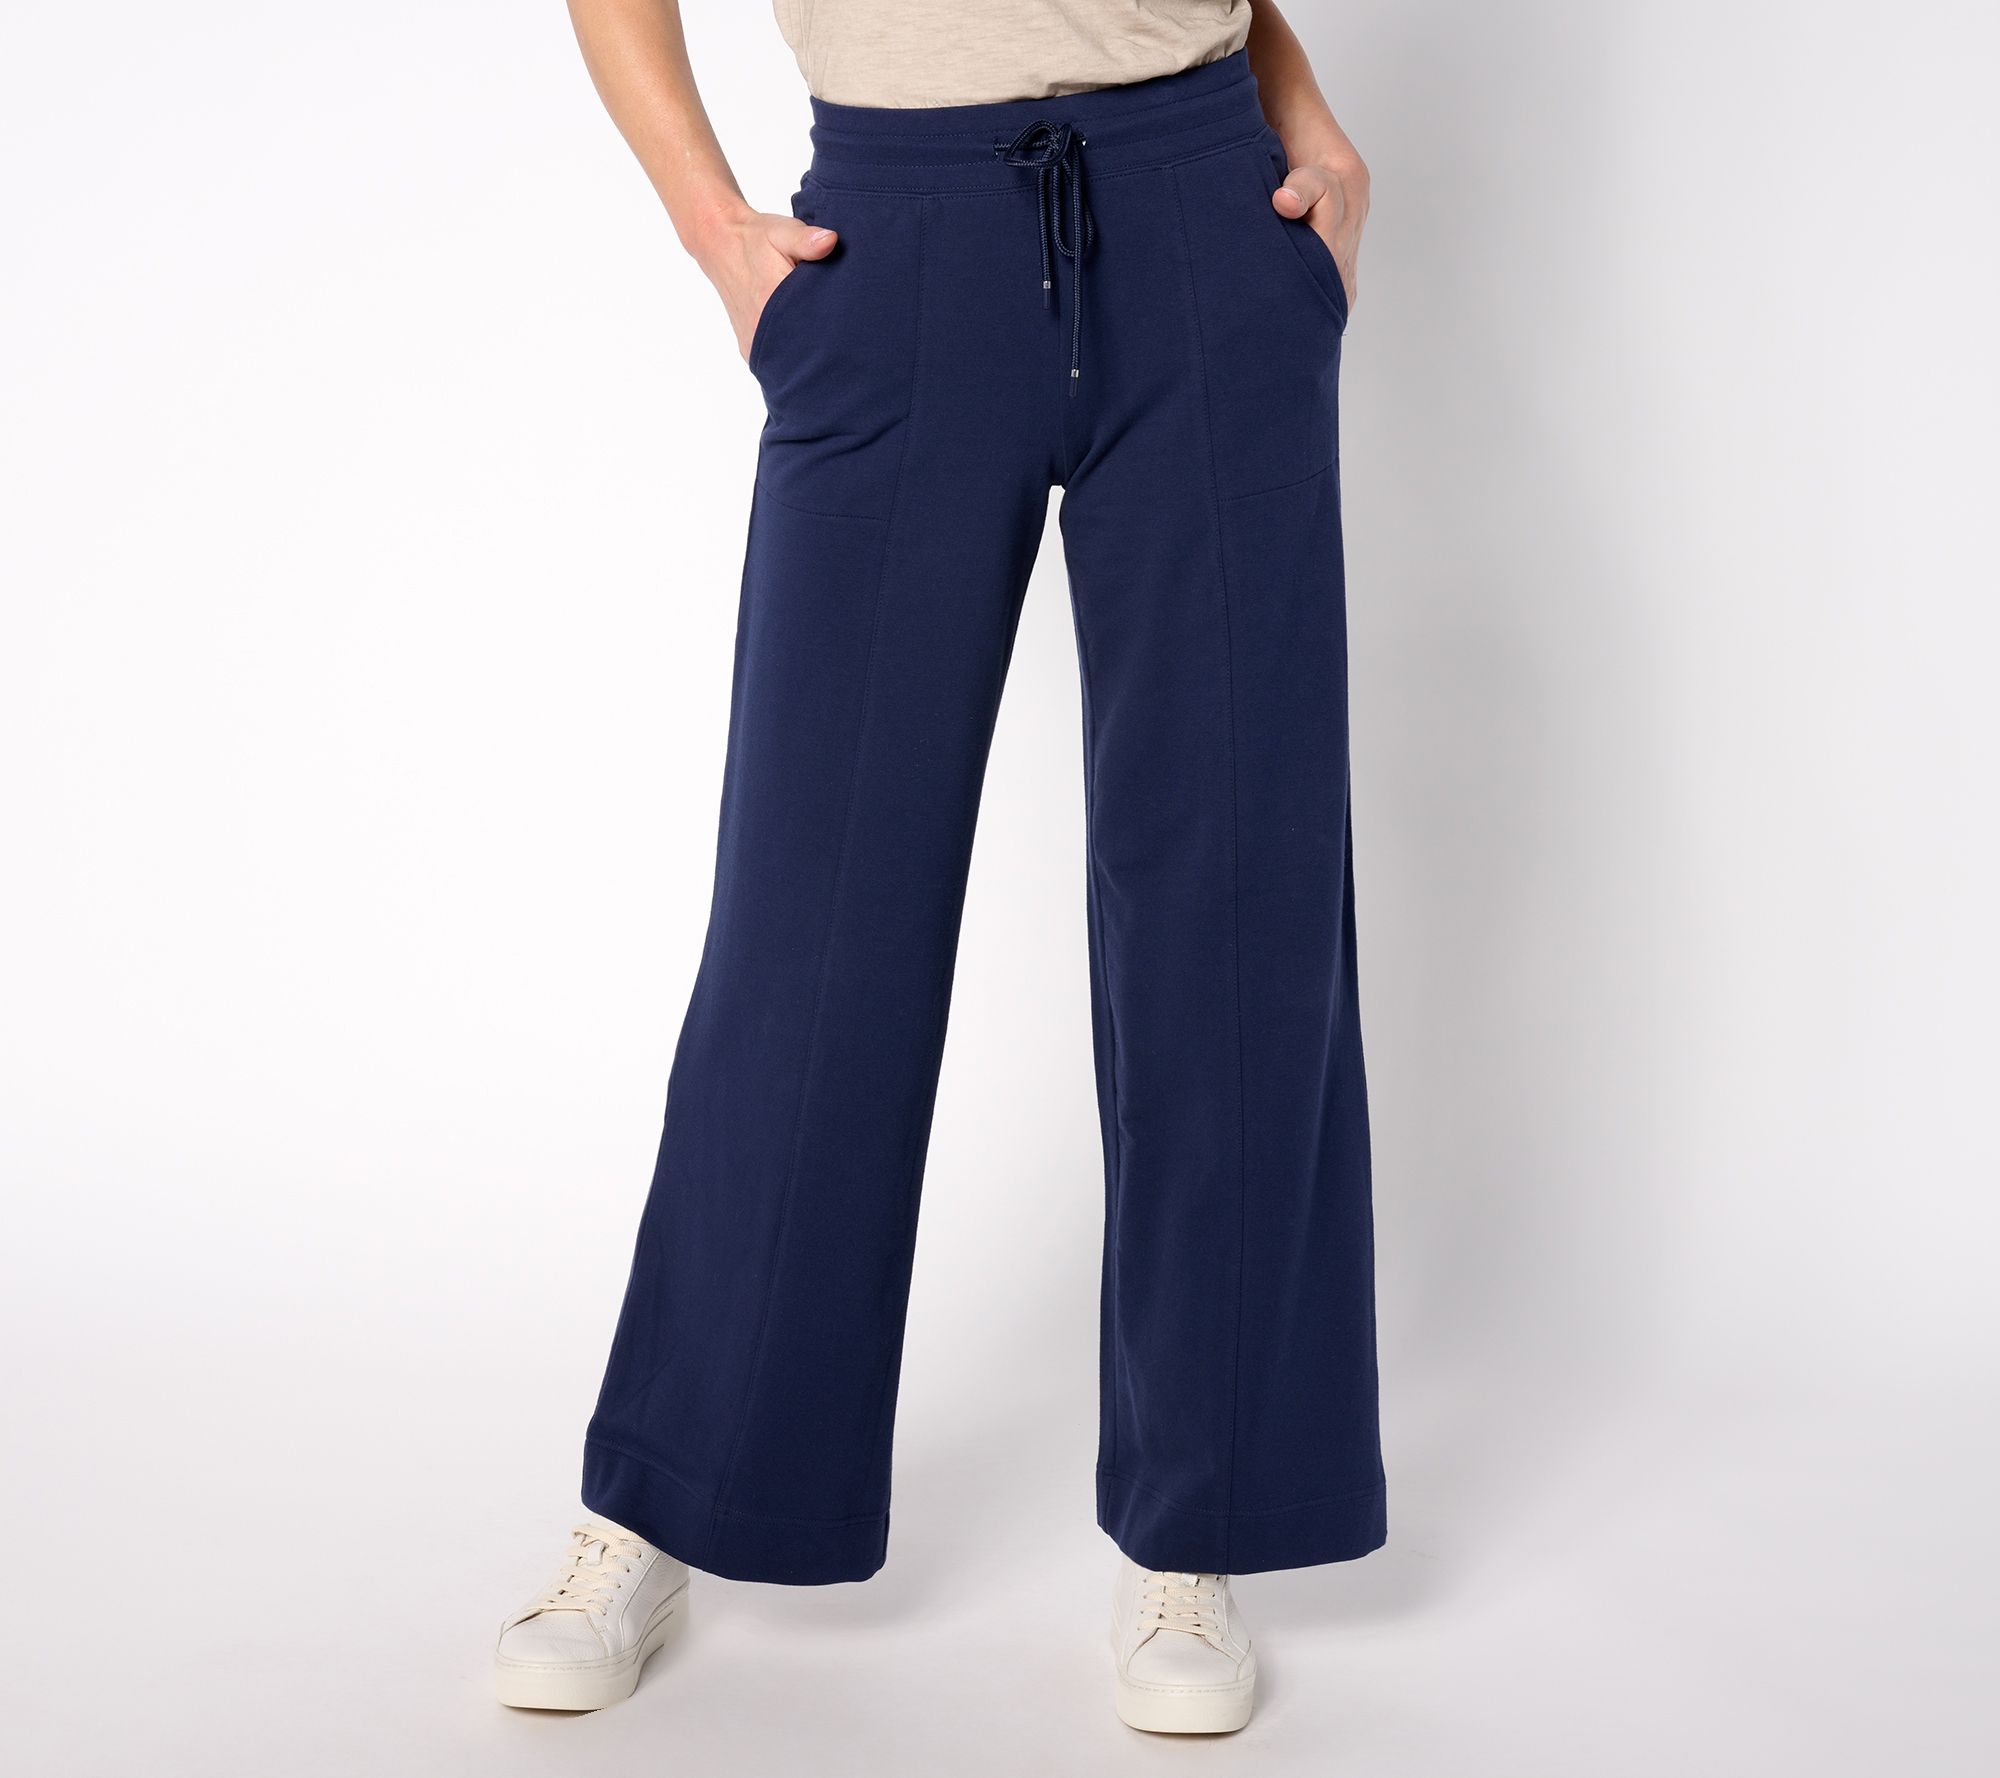 Denim & Co. Active French Leg Terry Pant Regular Wide